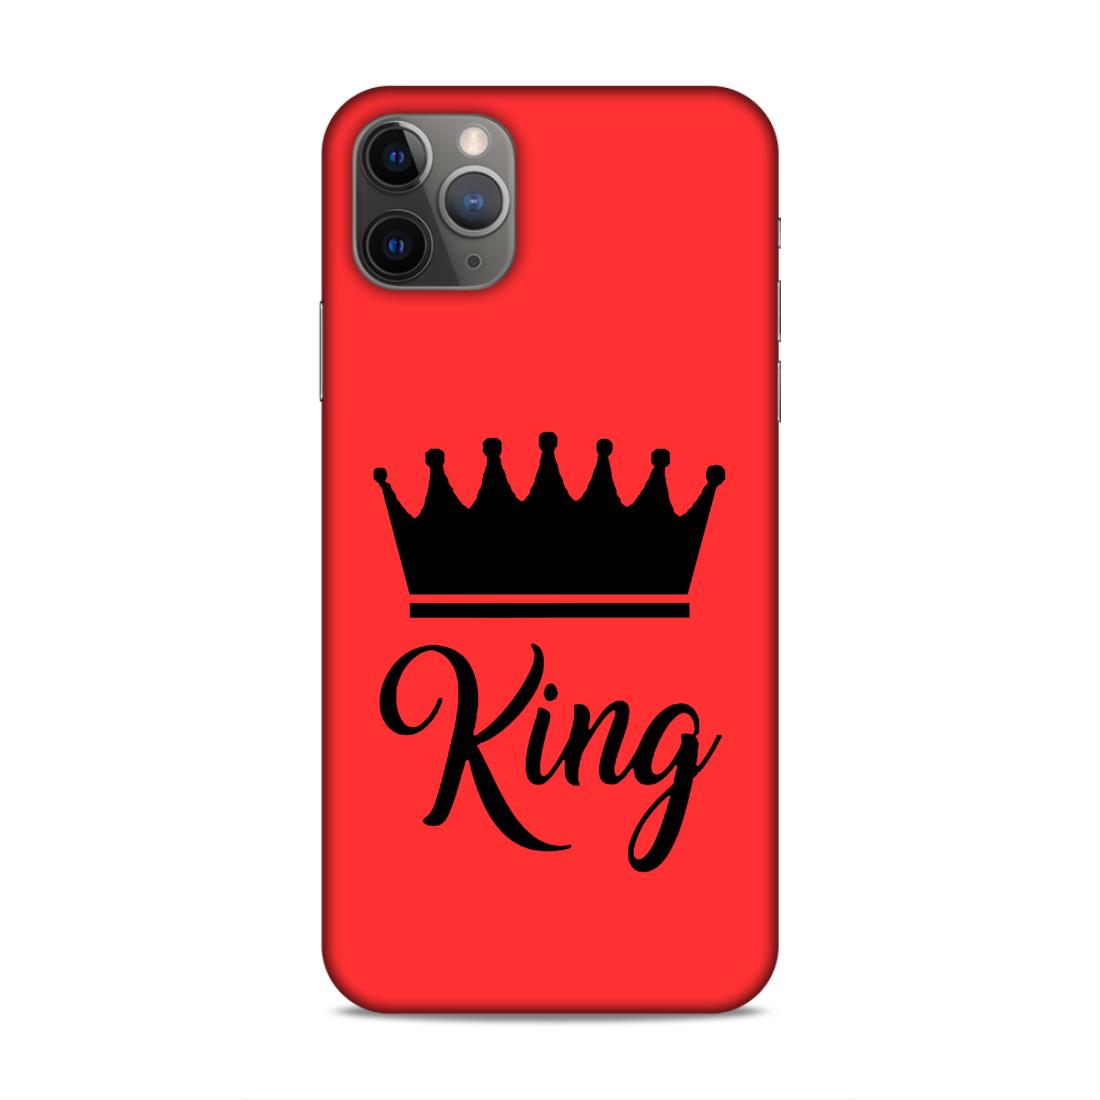 King Hard Back Case For Apple iPhone 11 Pro Max